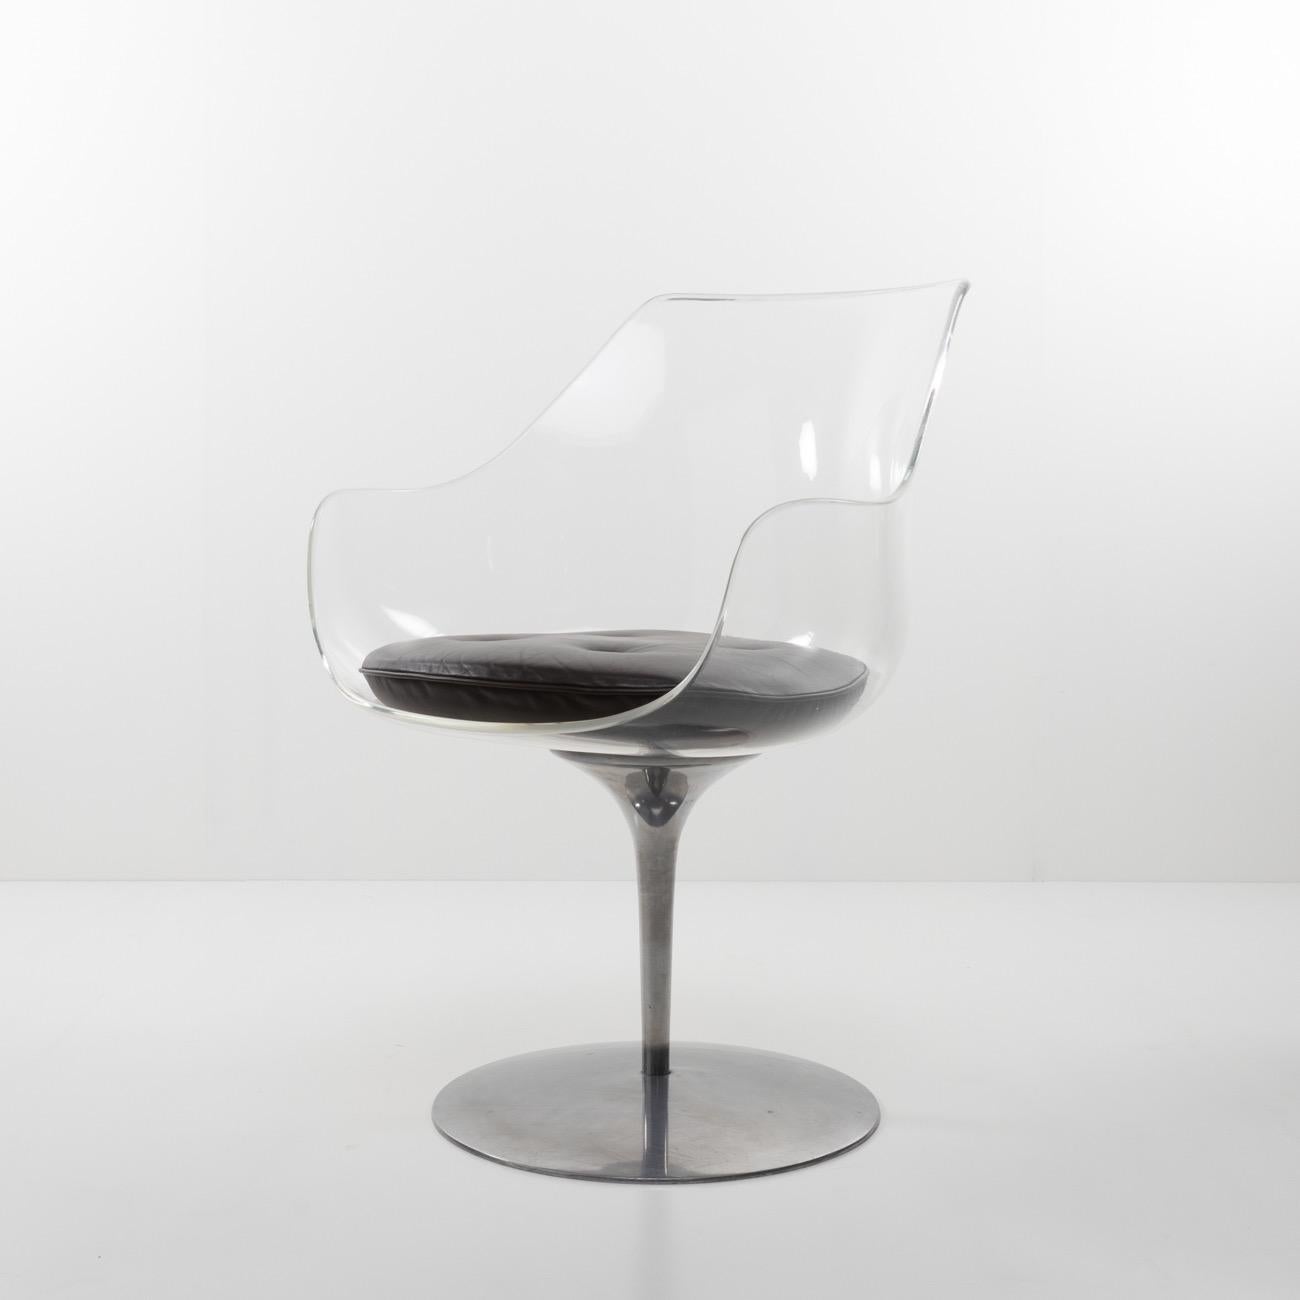 These chairs are made of acrylic glass and polished aluminium. Each one has a cushion covered in dark brown leather. 
Each example is signed under the base “MADE IN ITALY”, “Champagne Chair Laverne”, “FORMES NOUVELLES”. 
 
The set is in very good